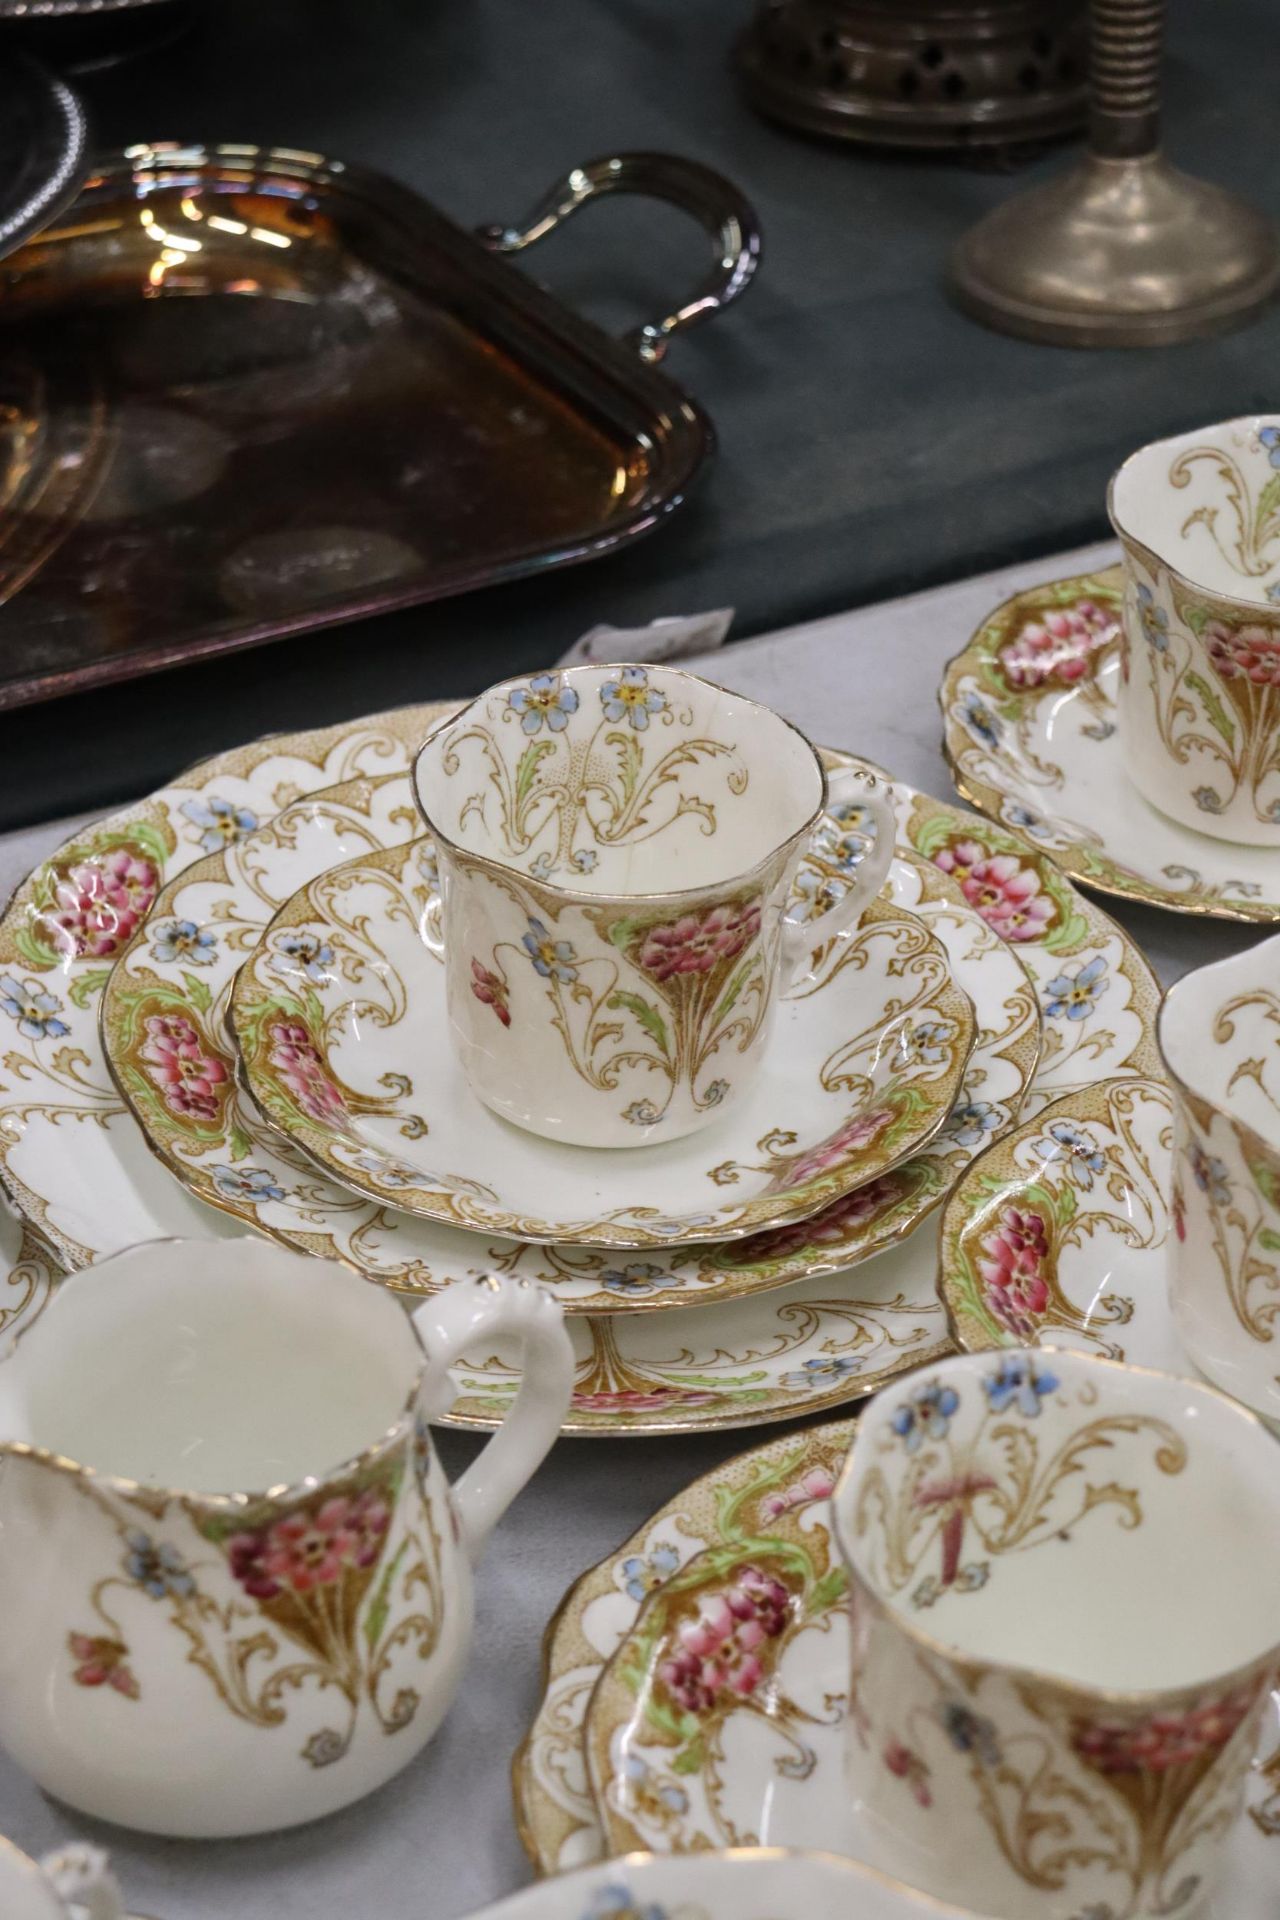 A LATE 18TH/EARLY 19TH CENTURY TEASET BY FRED B PEARCE & CO, LONDON, TO INCLUDE CAKE PLATES, A CREAM - Image 5 of 10